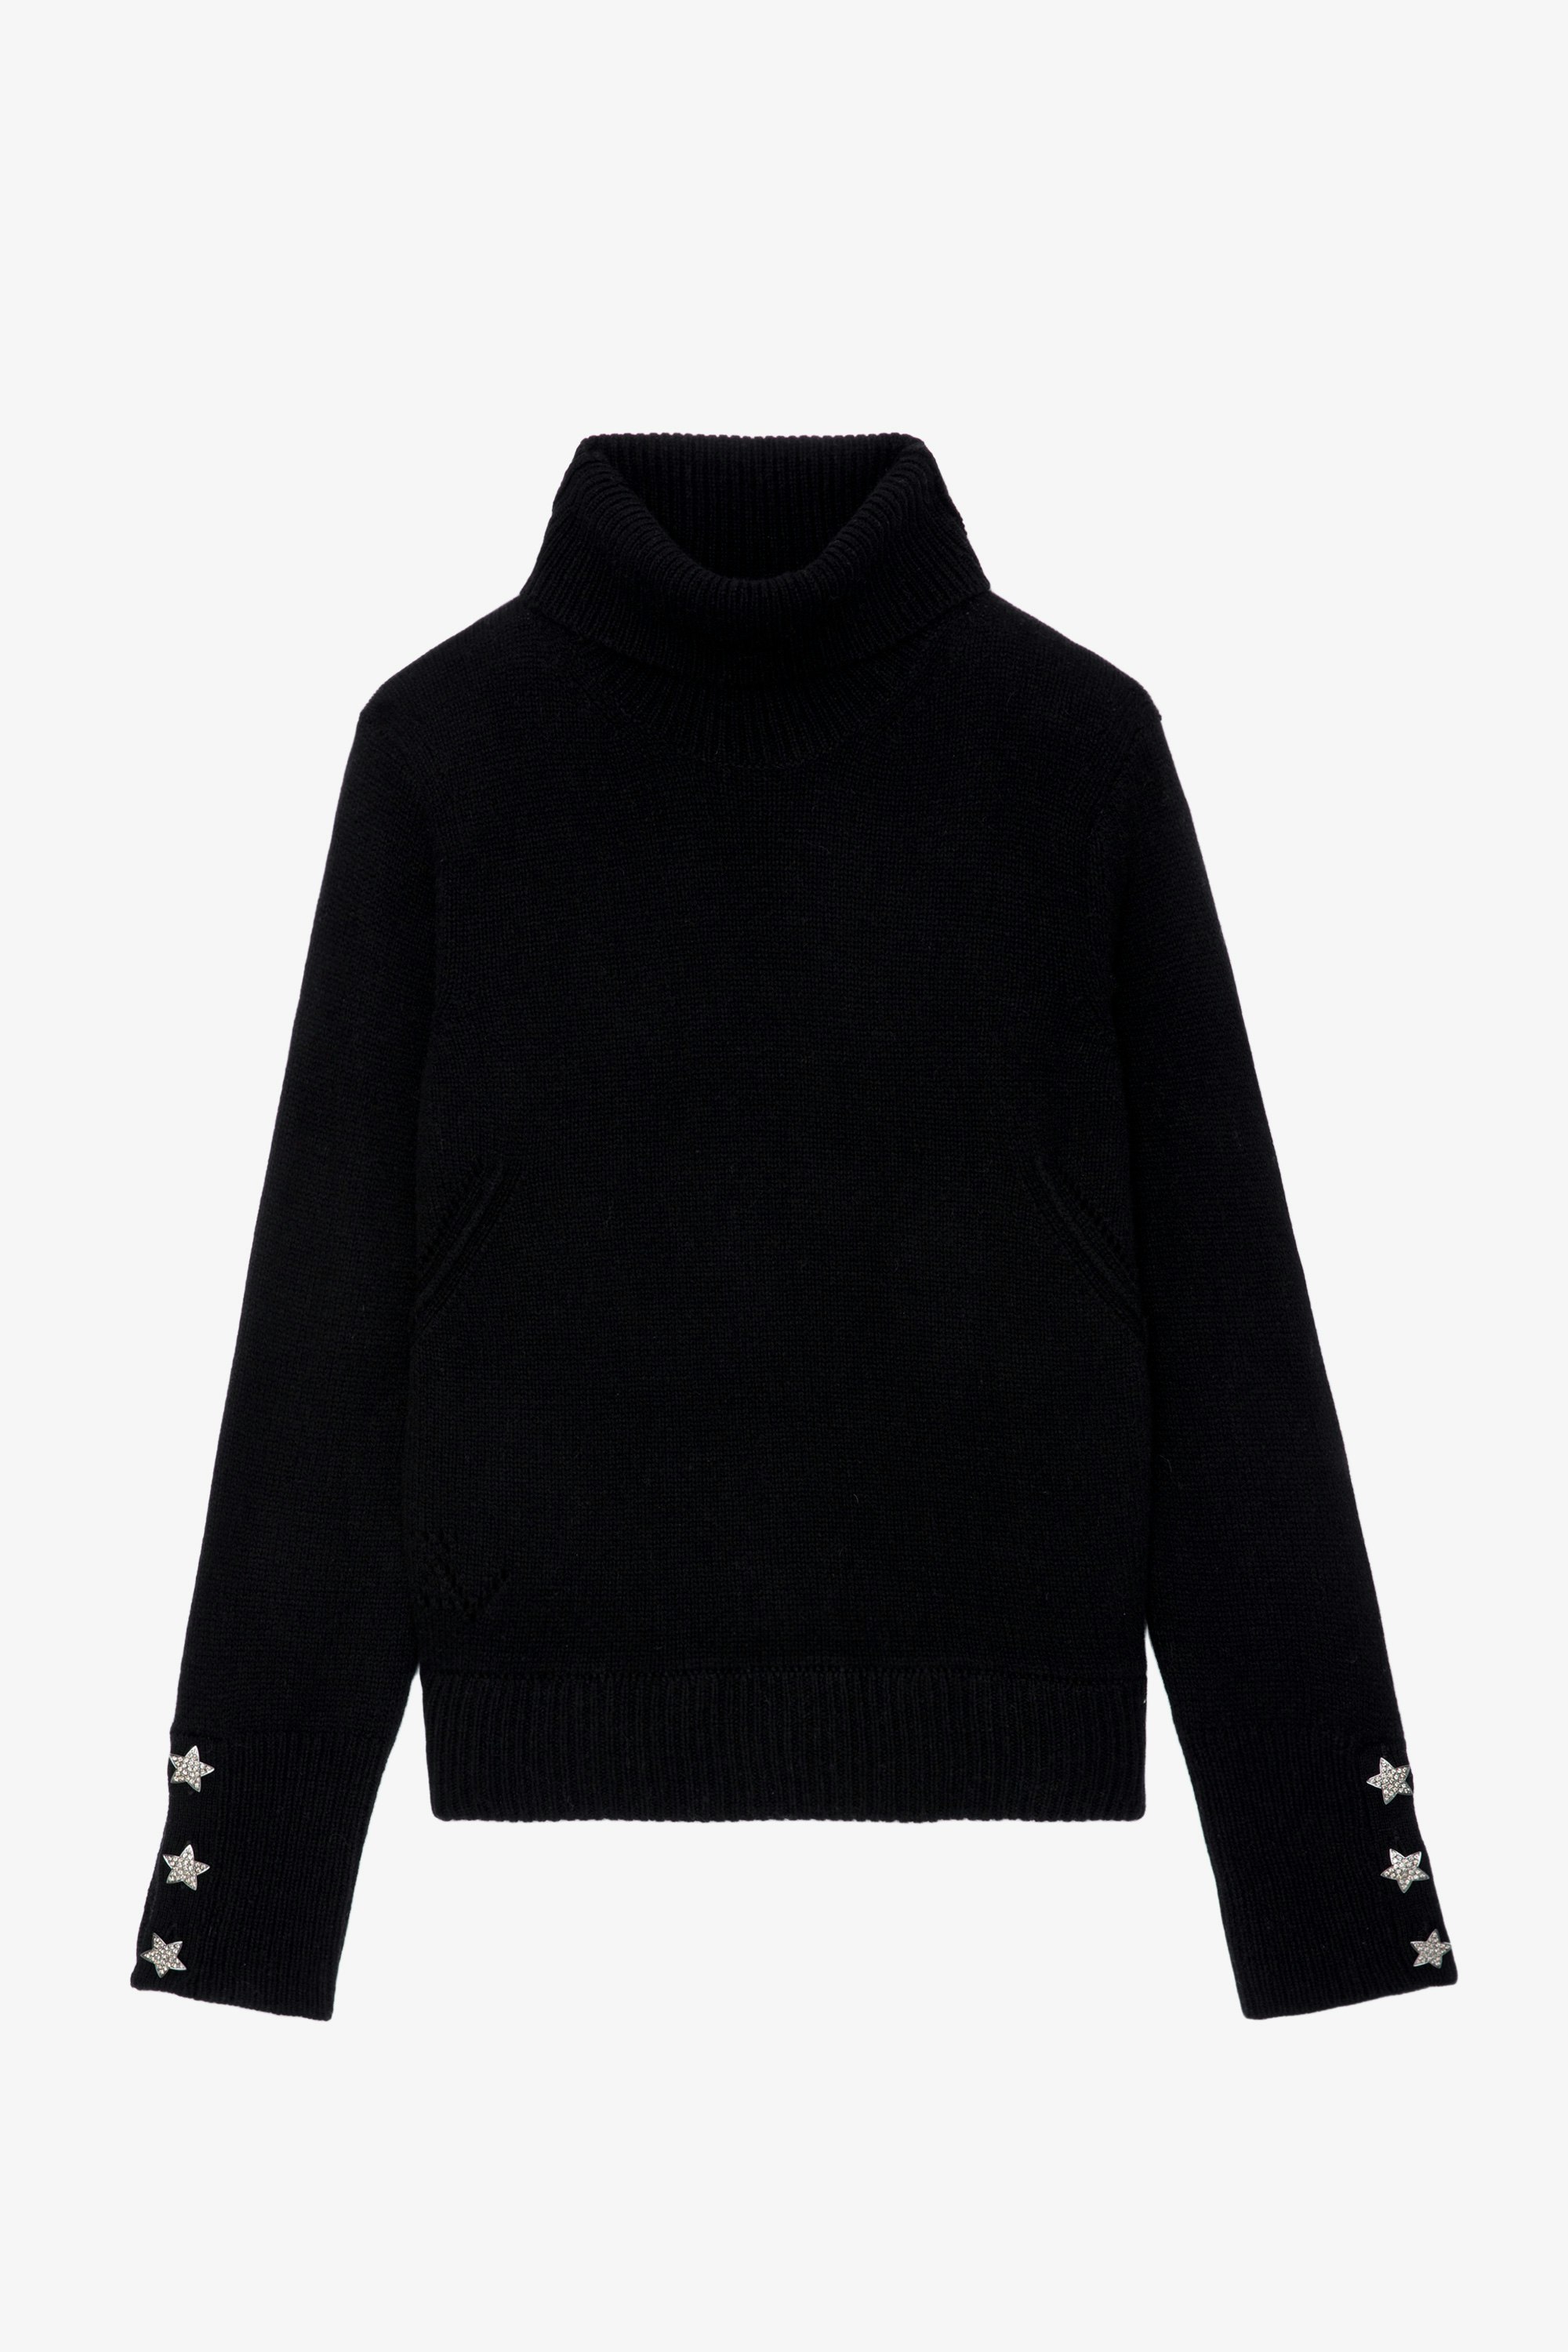 Boxy Jewelled Jumper - Black knit jumper with mock neck, long sleeves and buttoned cuffs with star jewels.